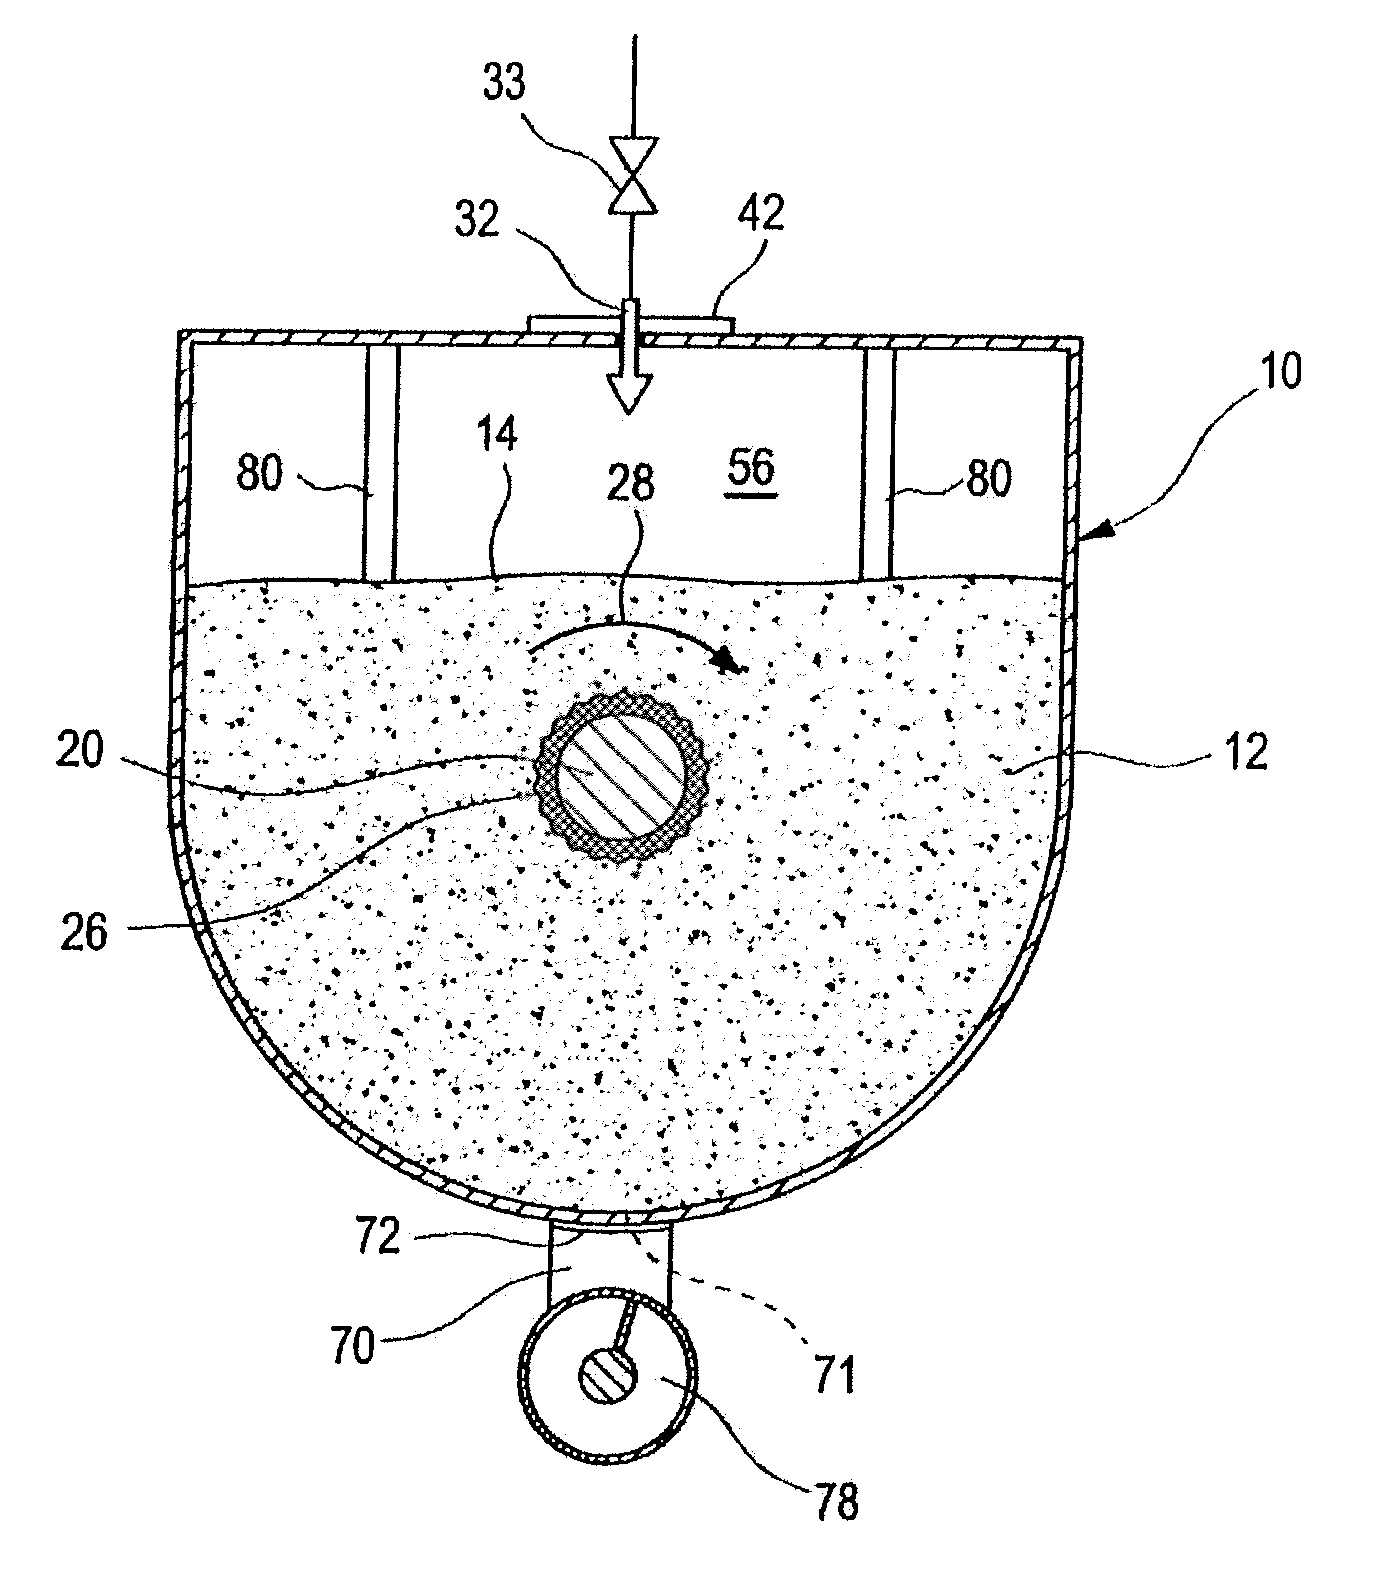 Method and Device for the Mechanical or Mechanical-Biological Treatment of Waste